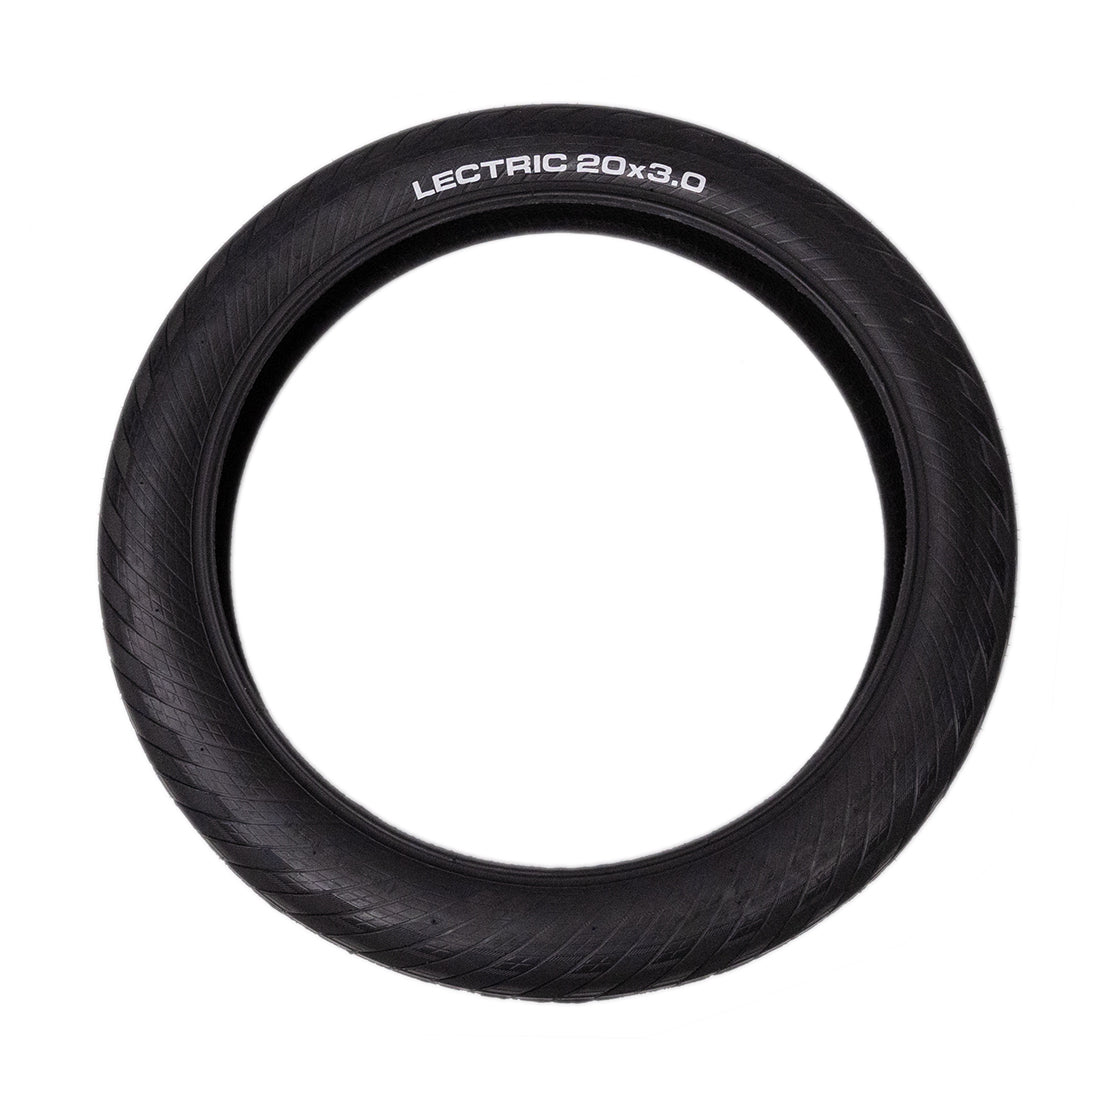 Lectric Xpedition tire